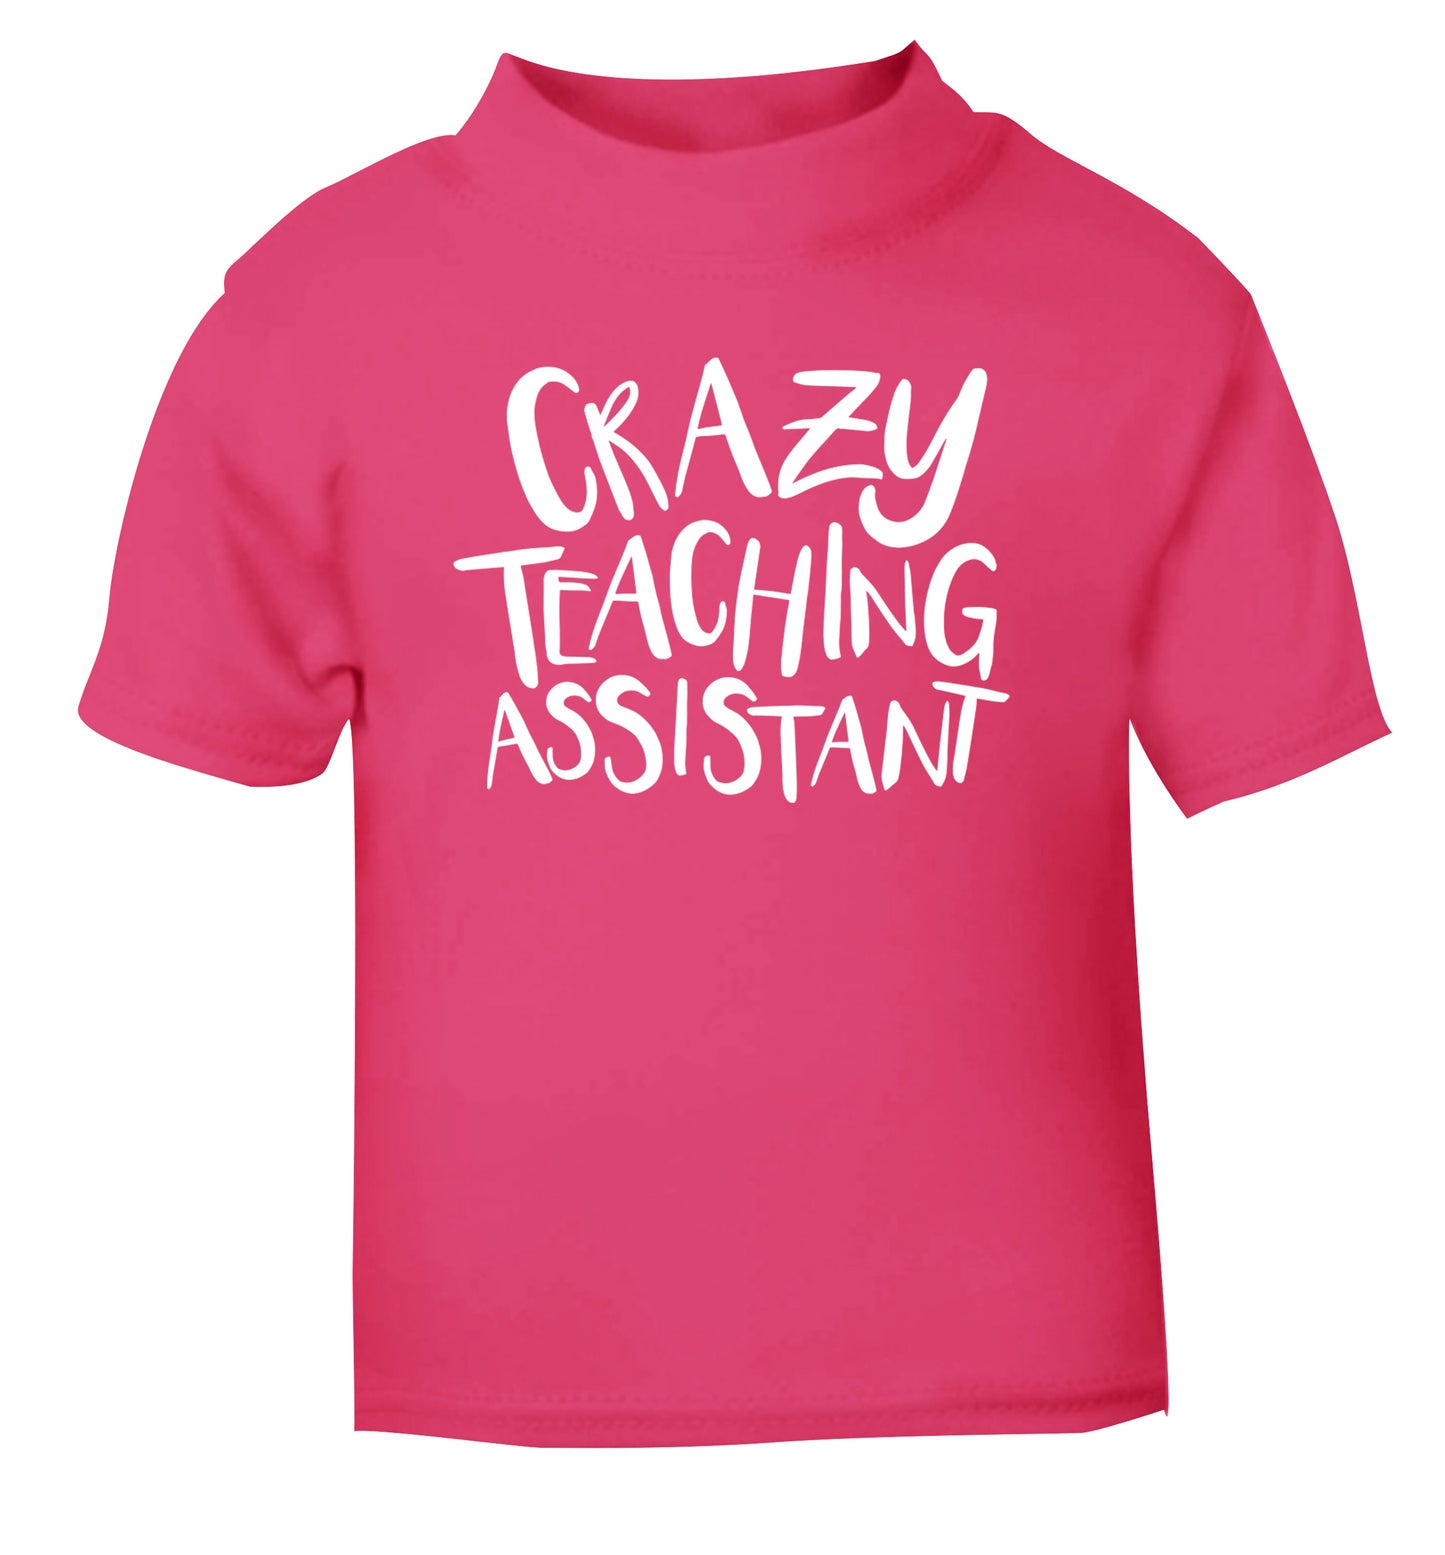 Crazy Teaching Assistant pink Baby Toddler Tshirt 2 Years